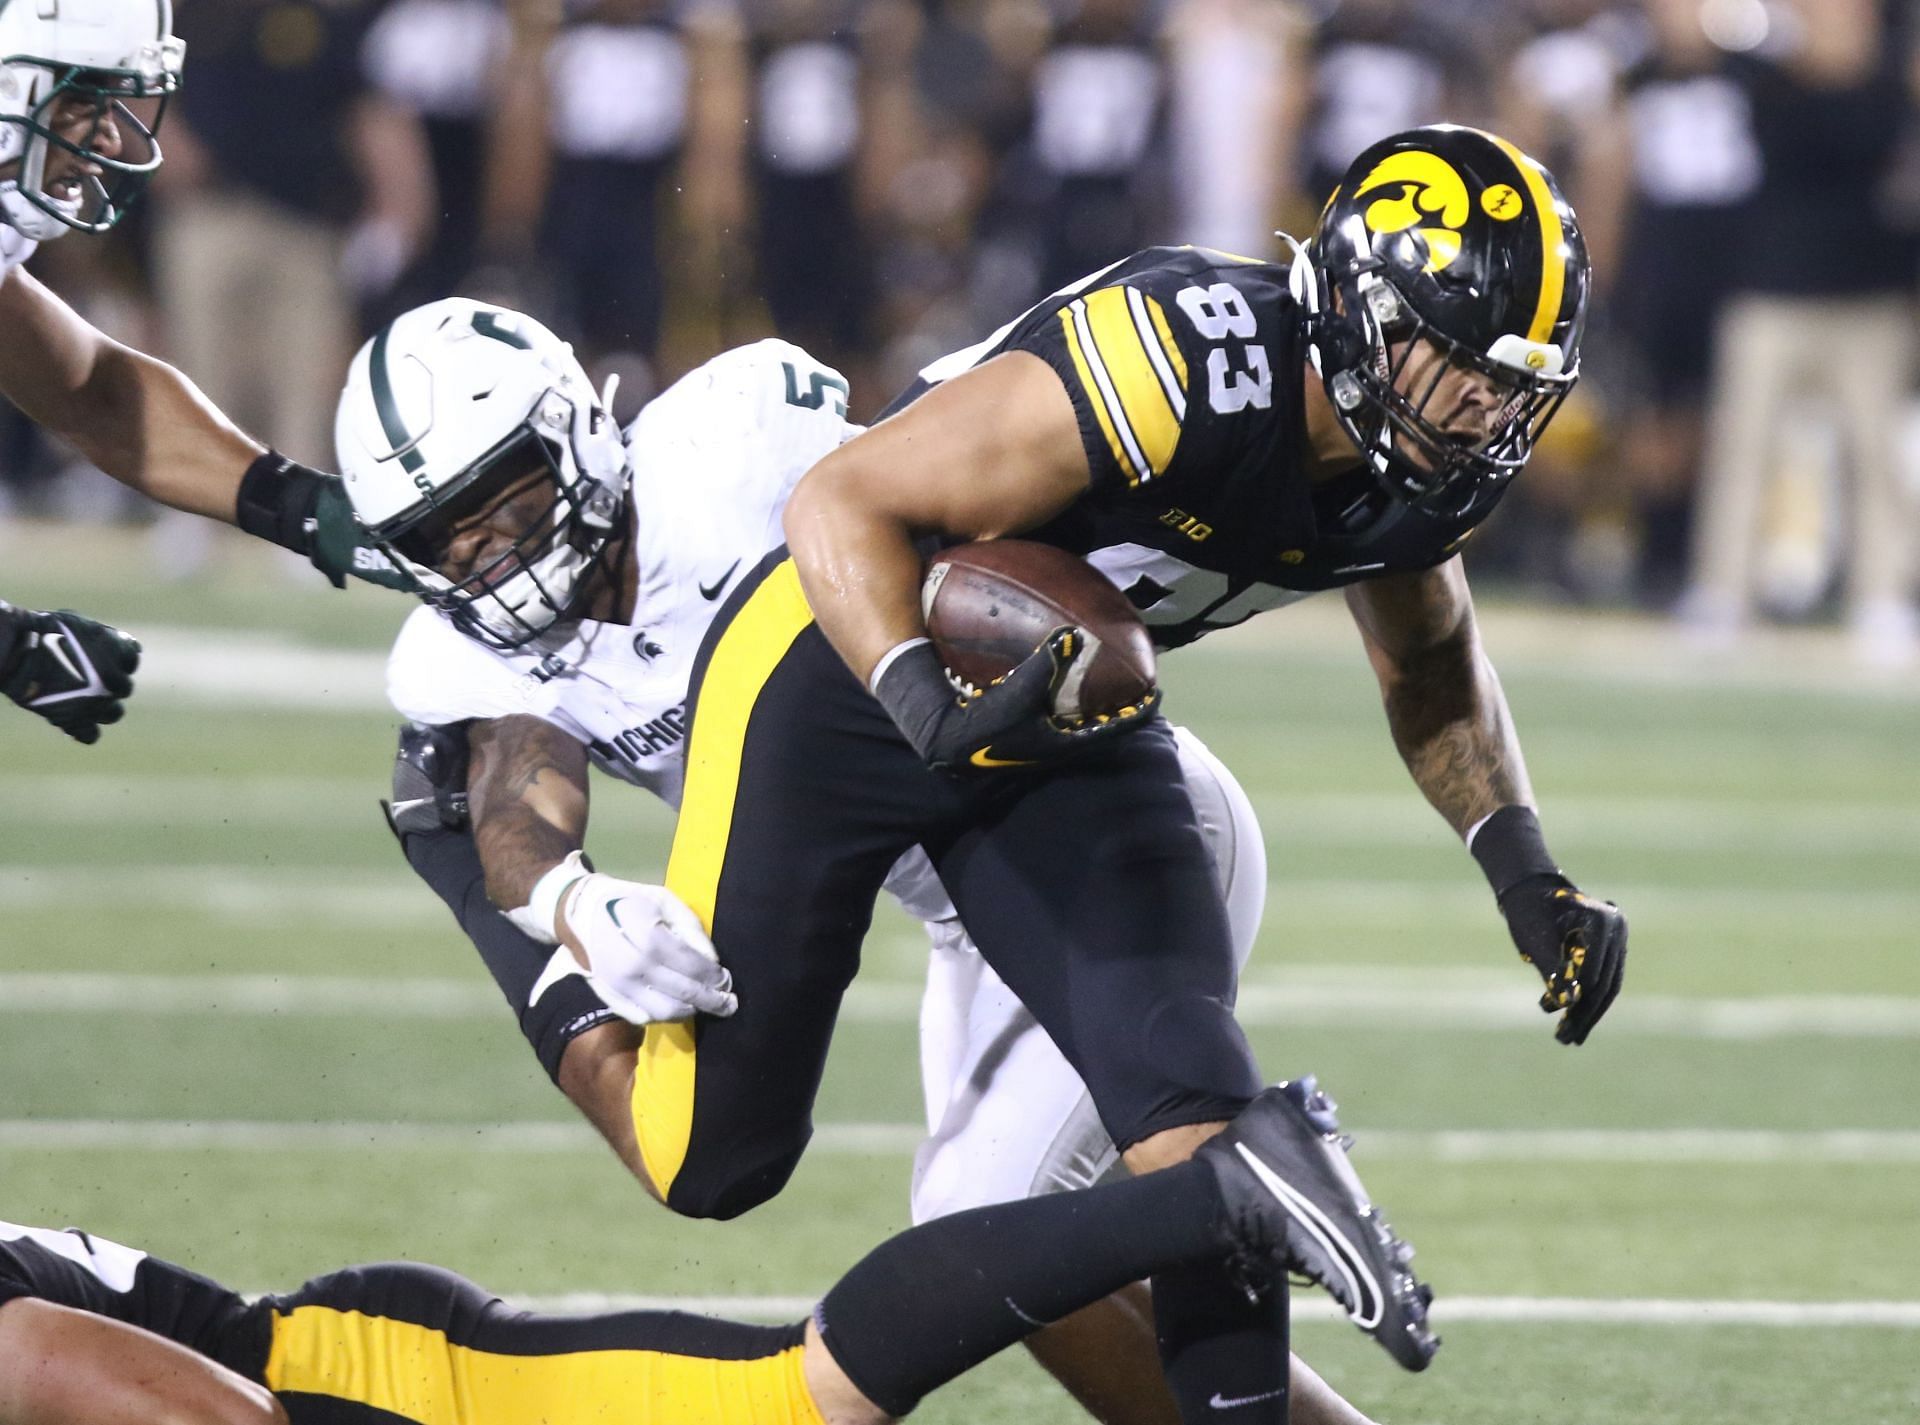 Erick All #83 of the Iowa Hawkeyes breaks a tackle on a touchdown run during the first half against linebacker Jordan Hall #5 of the Michigan State Spartans